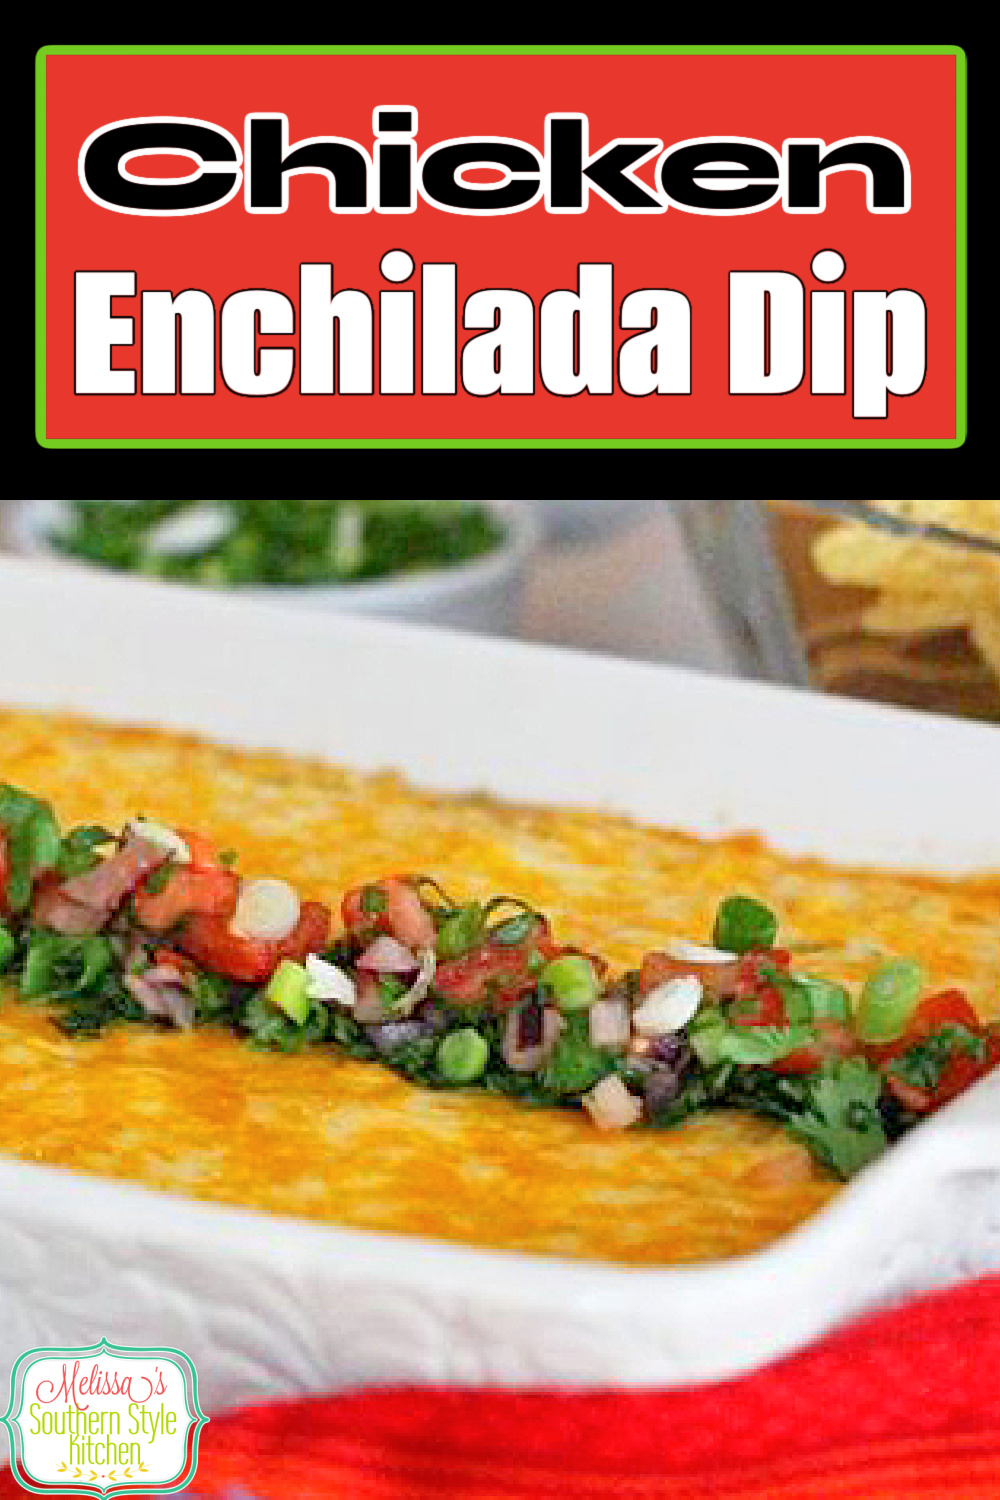 This Chicken Enchilada Dip is packed with fiesta flavors. Serve it with tortilla chips or fritos scoops for dipping! #chickendip #chickenenchiladadip #chickenenchiladas #easychickenrecipes #appetizers #diprecipes #chicken #mexicandiprecipes via @melissasssk